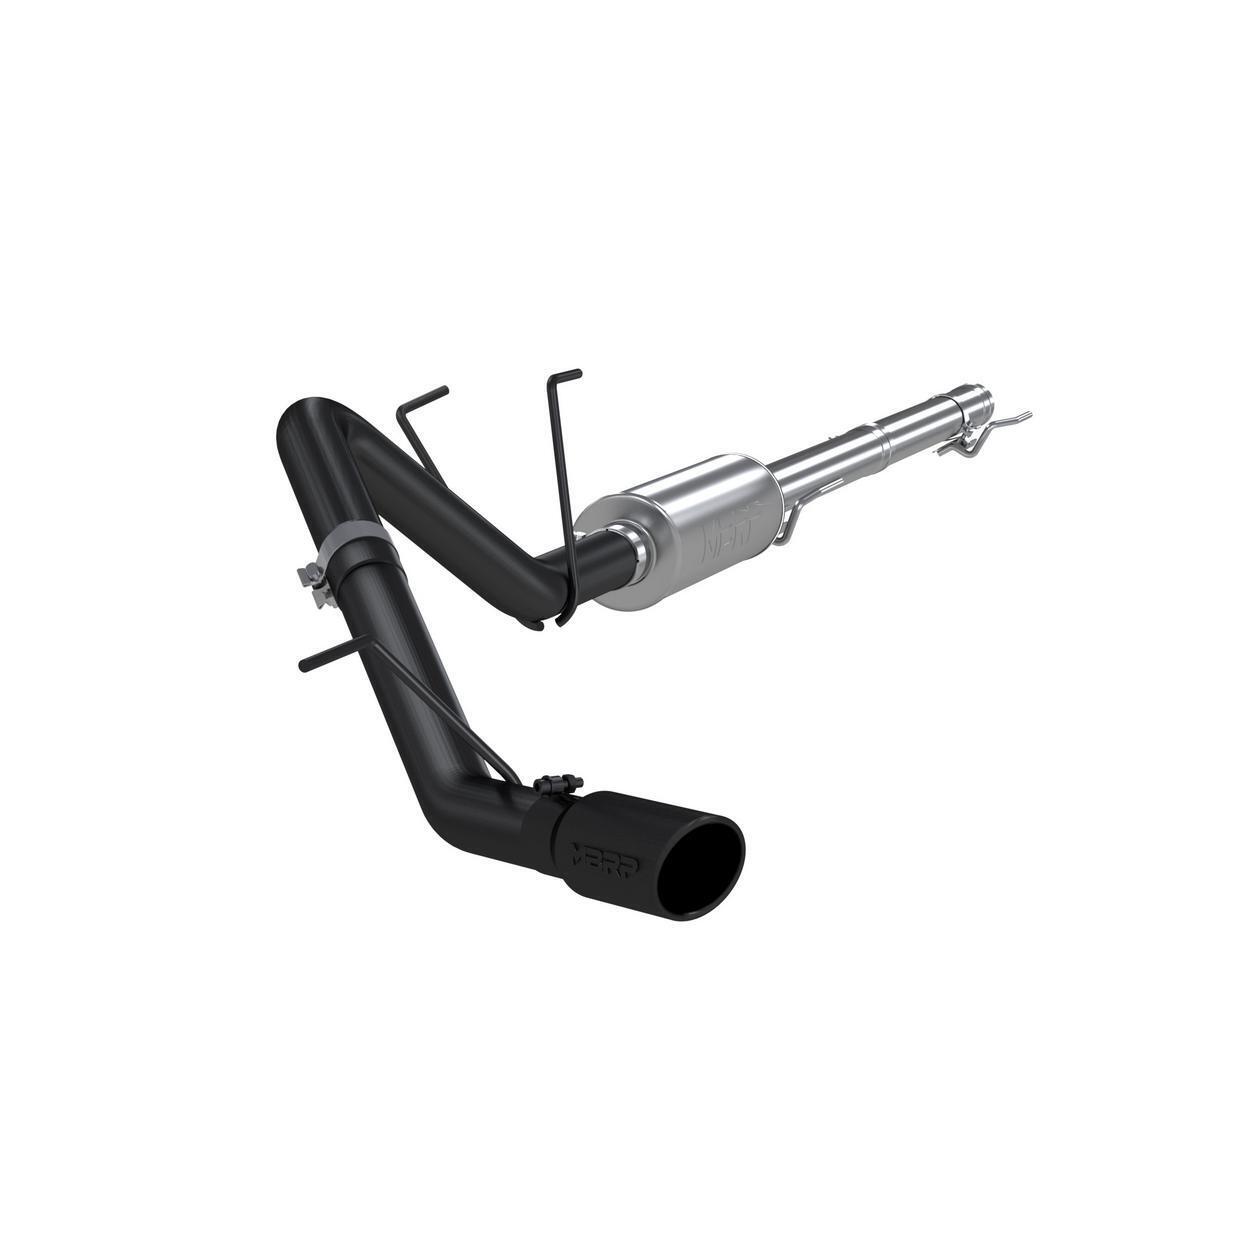 MBRP Exhaust S5142BLK-VT Exhaust System Kit for 2013 Ram 1500